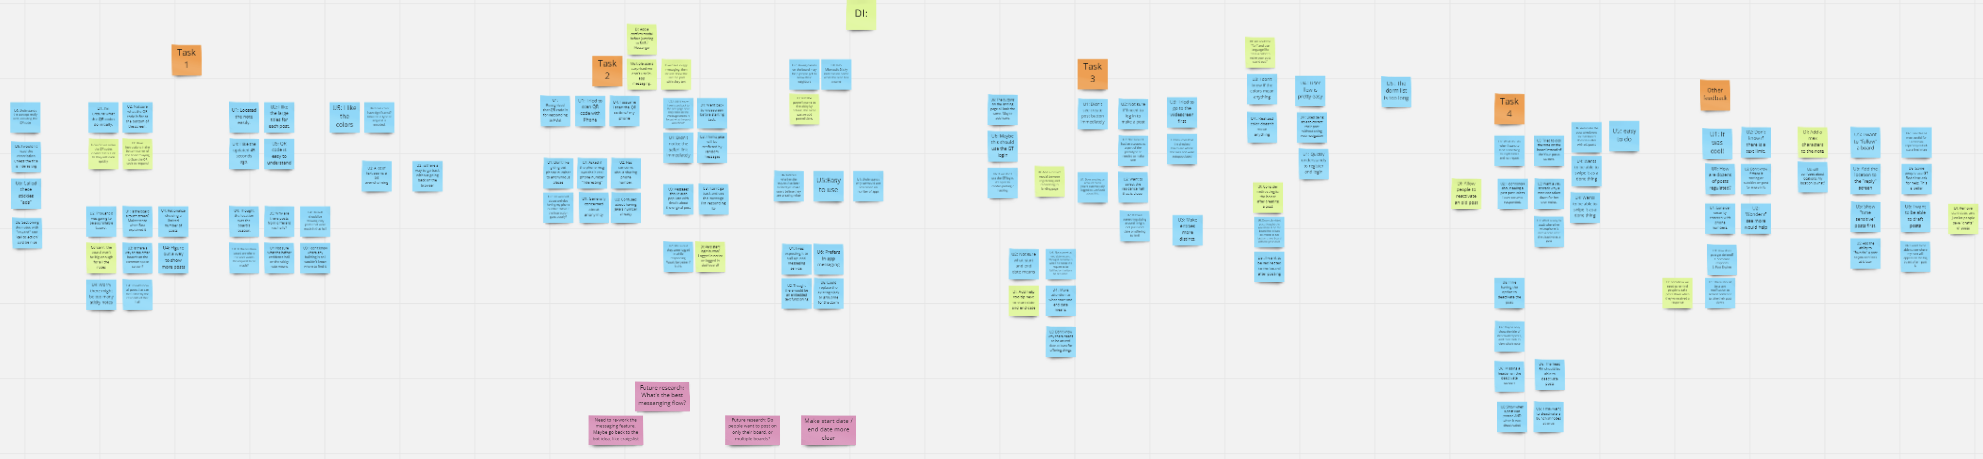 Affinity diagram for remote moderated usability study interview notes